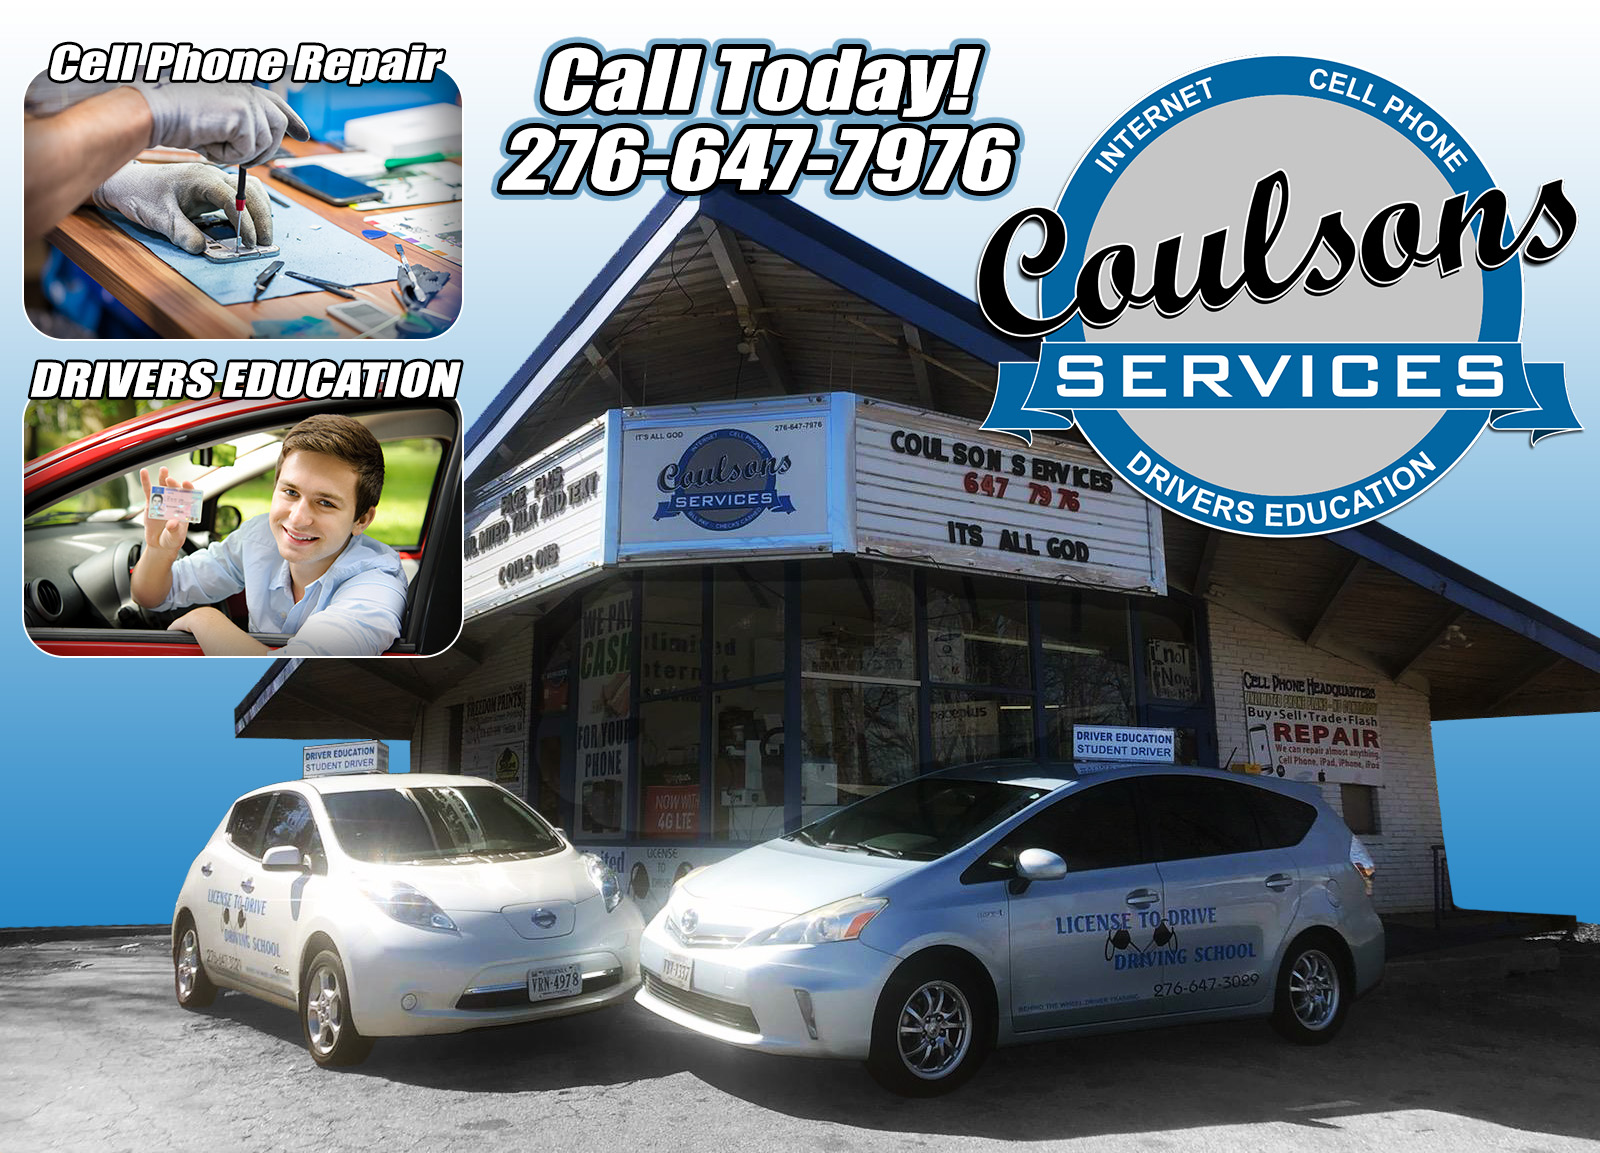 Coulson Services Cell Phone Repair - Henry County and Martinsville Virginia 24112